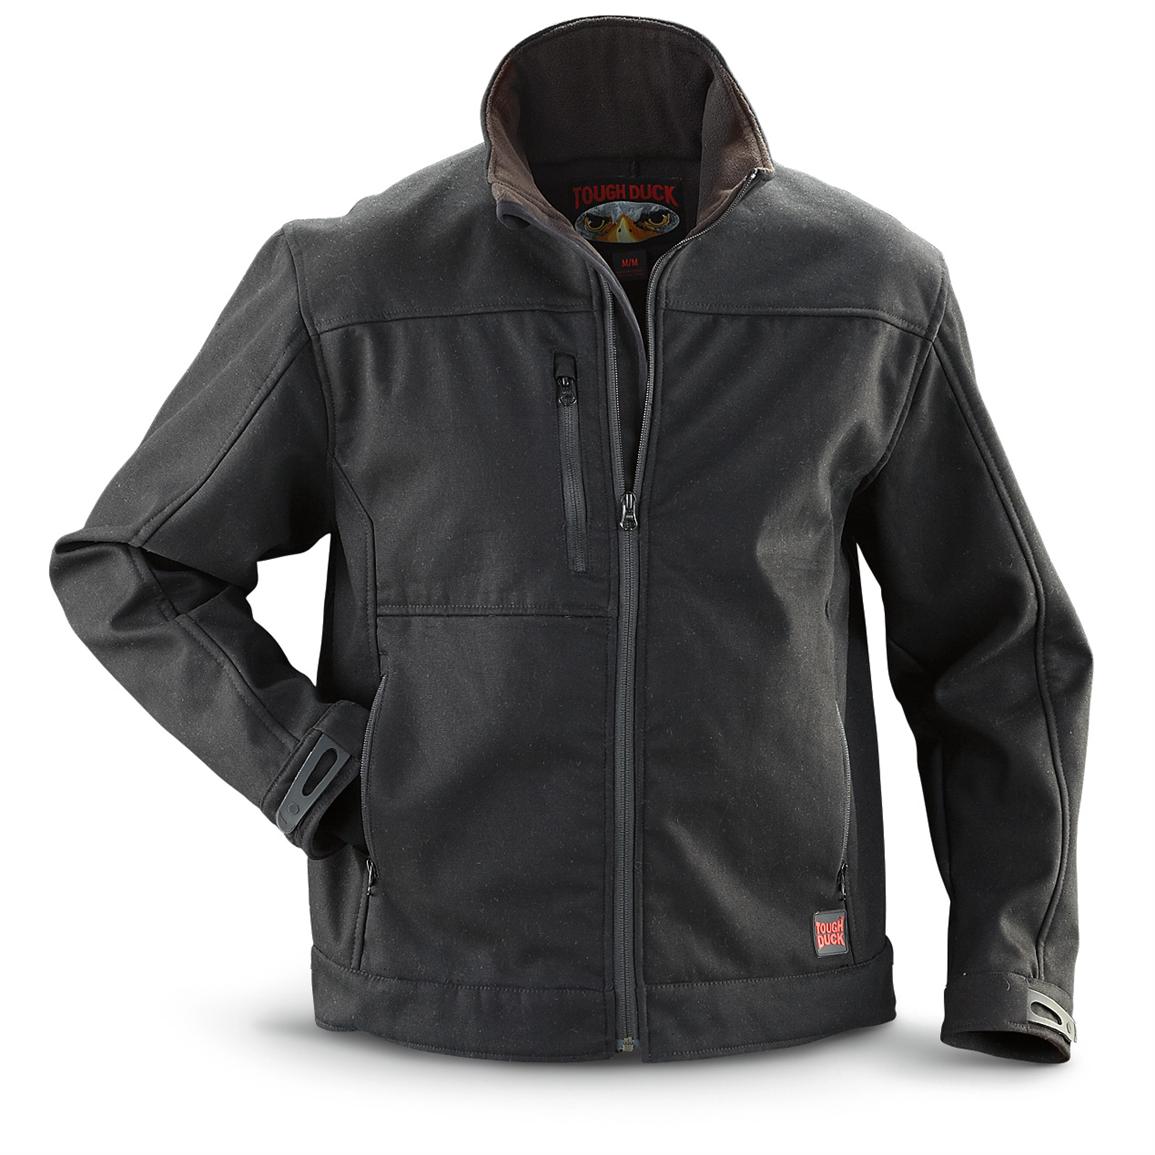 Richlu® Jacket - 210783, Insulated Jackets & Coats at Sportsman's Guide